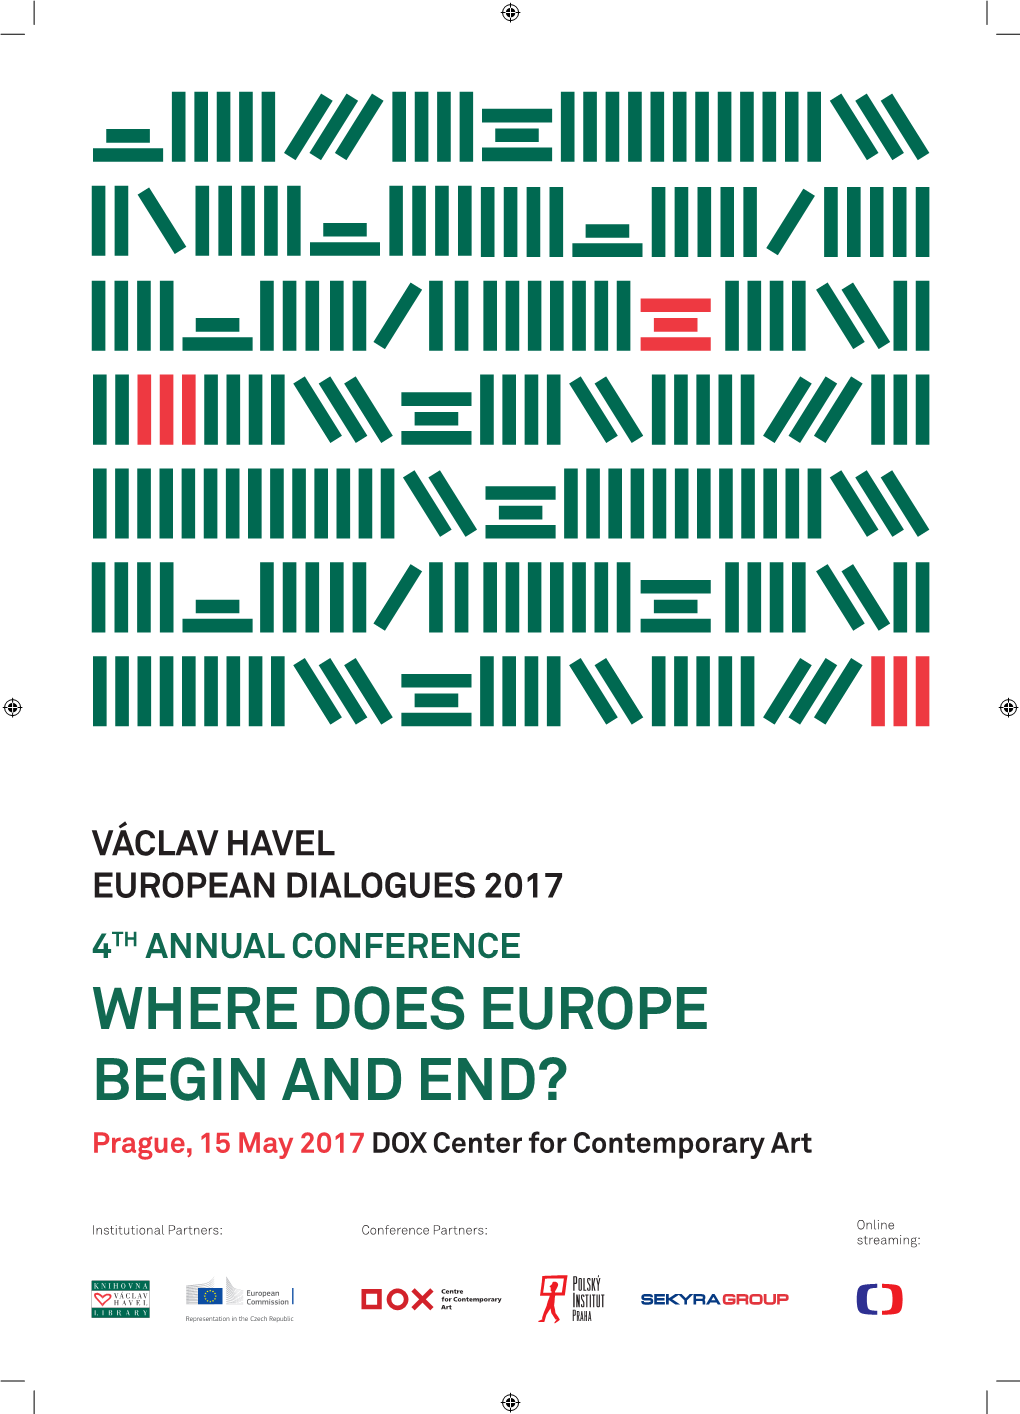 Where Does Europe Begin and End? Prague, 15 May 2017 Dox Center for Contemporary Art